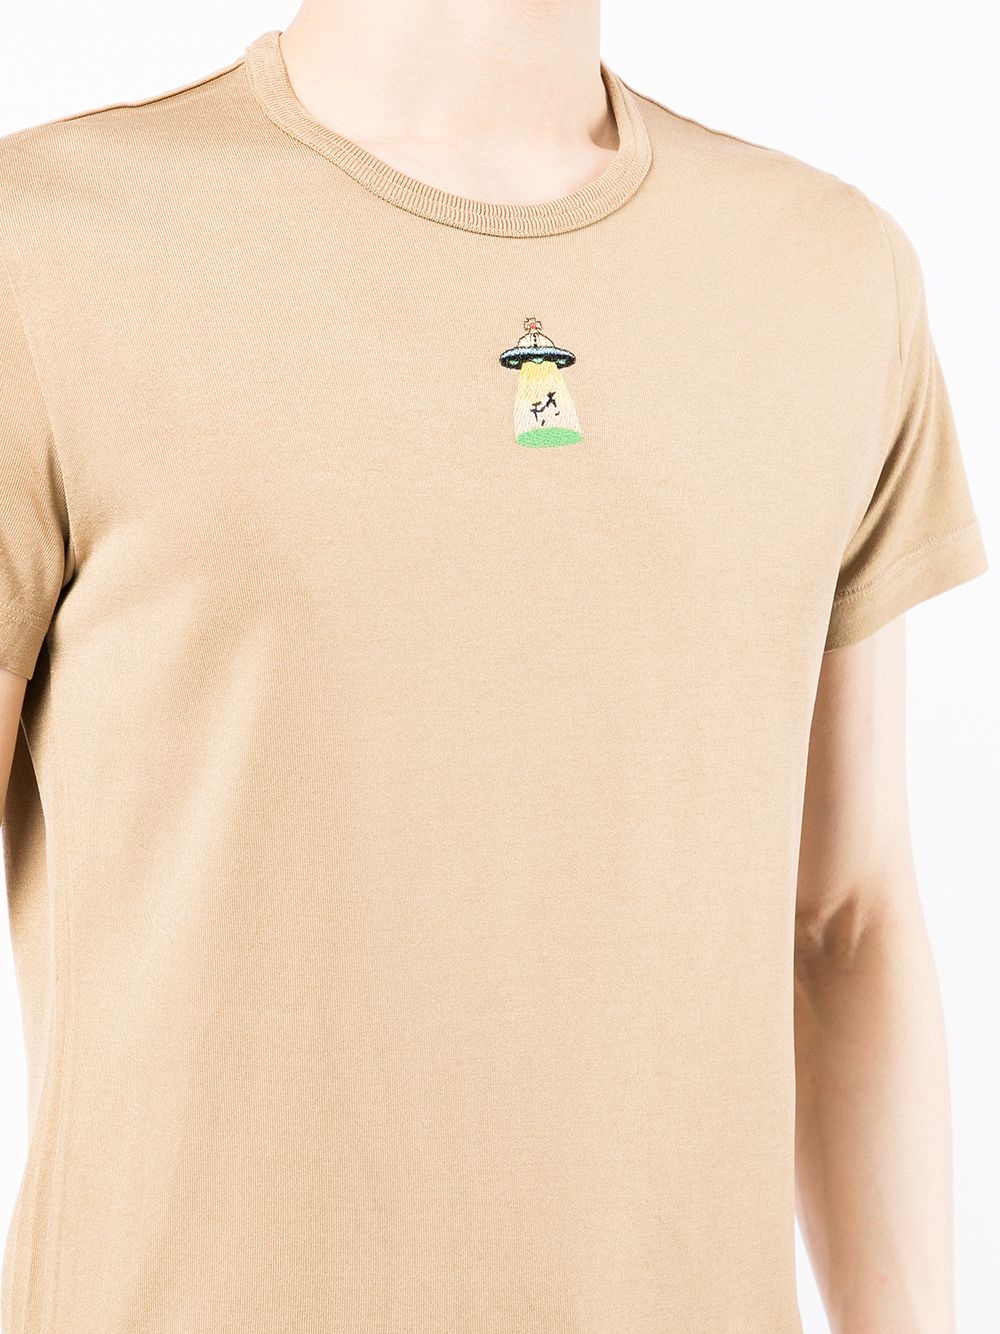 spaceship-embroidered short-sleeve T-shirt - 5